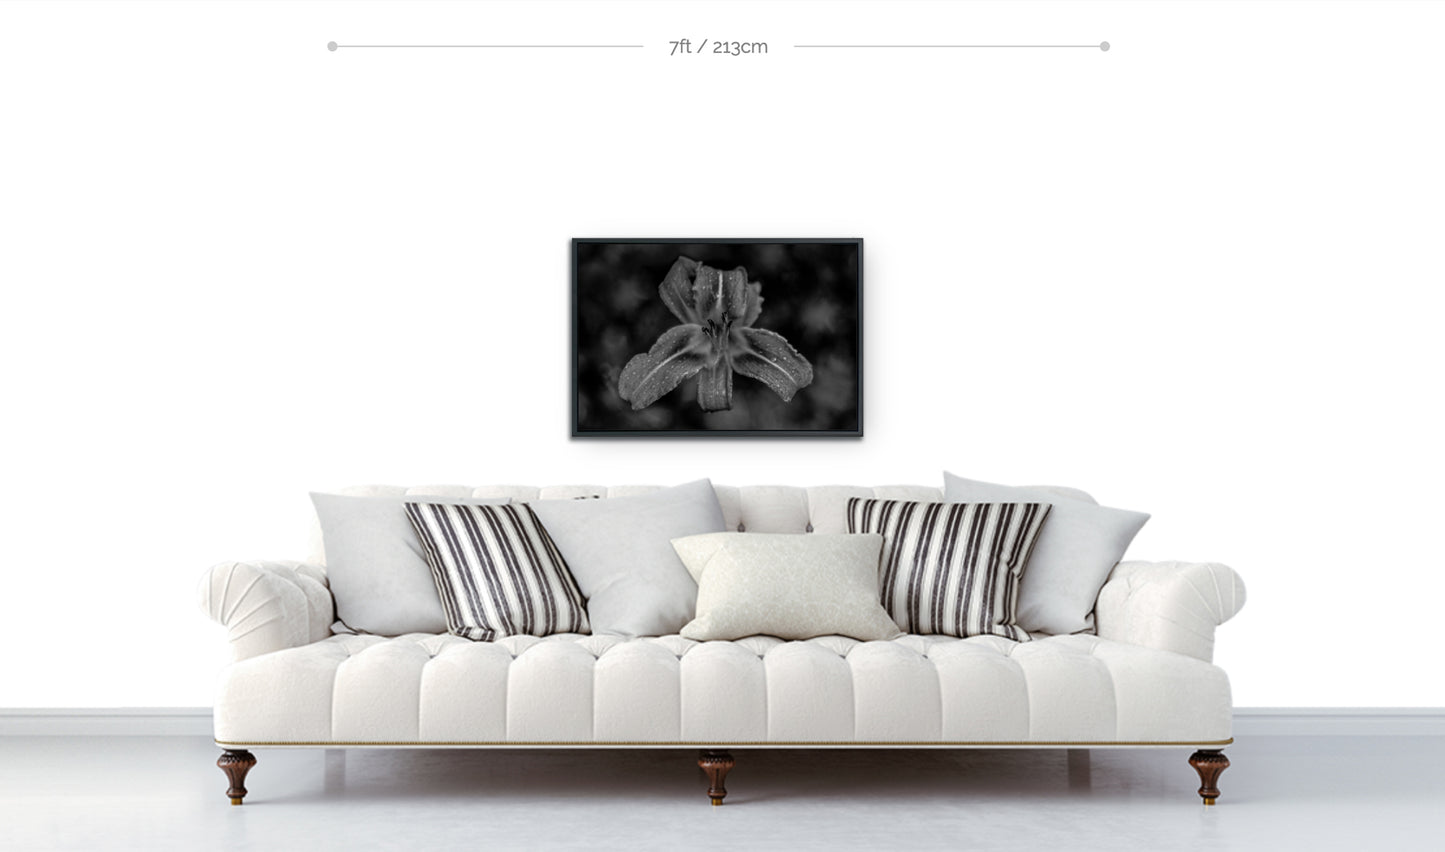 Flower wall decor framed metal print black and white closeup photograph daylily hanging above sofa